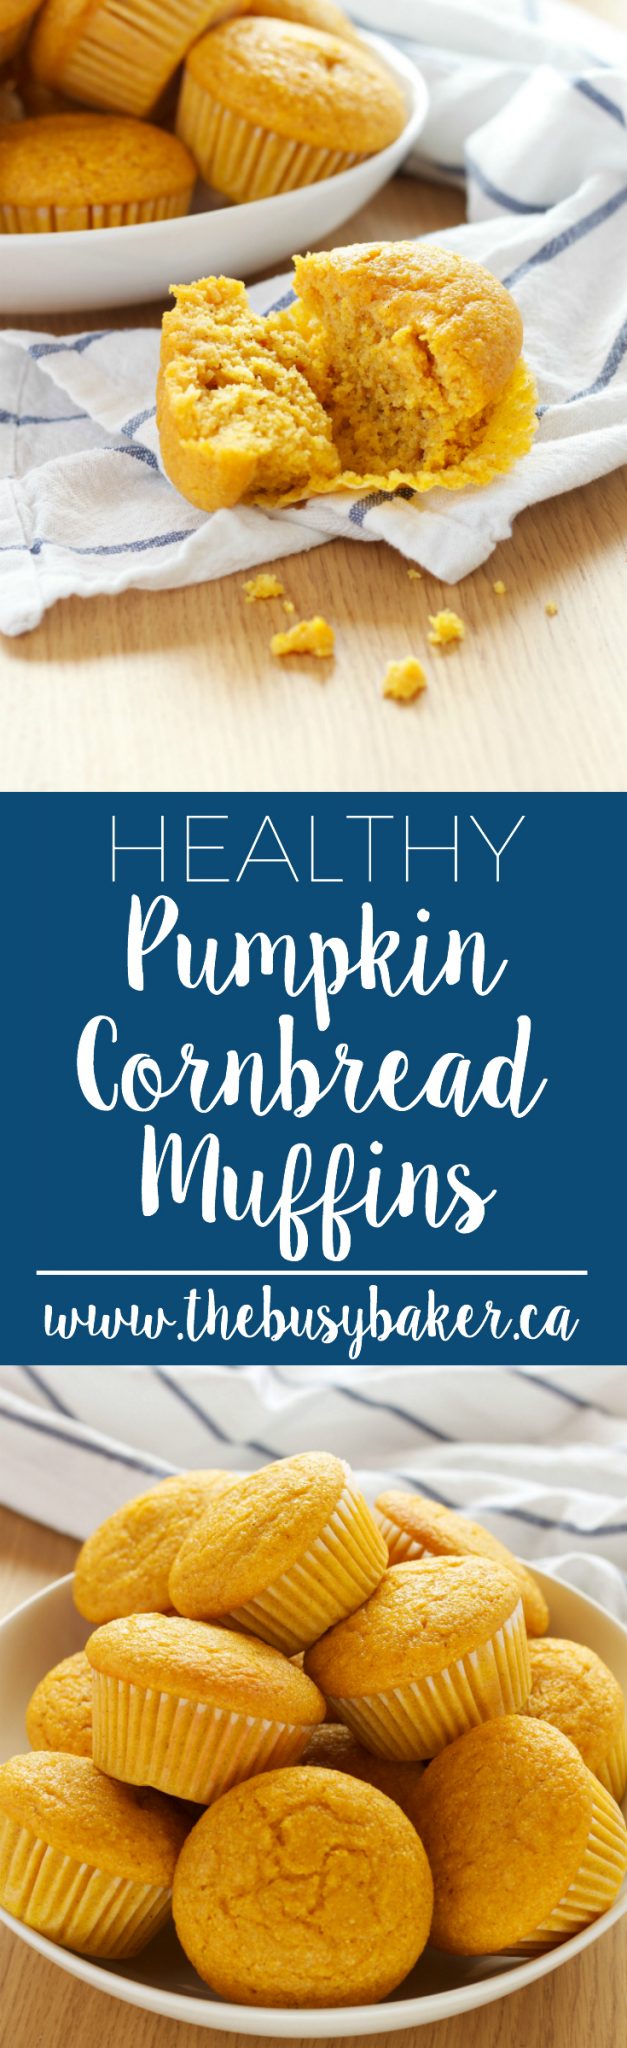 These Healthy Pumpkin Cornbread Muffins make a delicious easy to make snack, but they're best served alongside any soup, stew or chili! via @busybakerblog